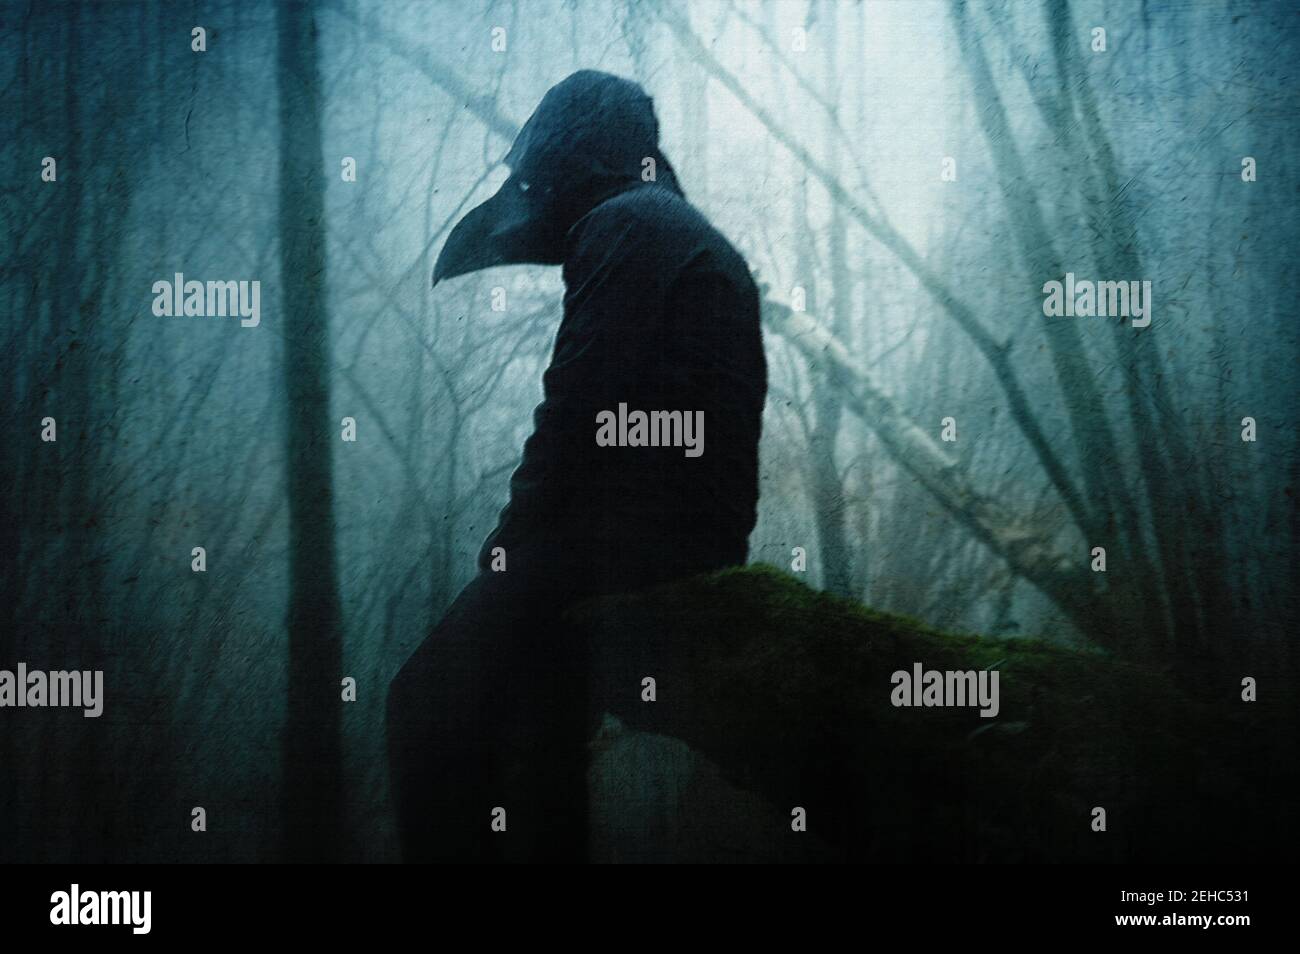 A horror concept of a spooky hooded figure in a plague doctor mask. Sitting in a forest on a winters day. With a grunge, artistic, edit Stock Photo